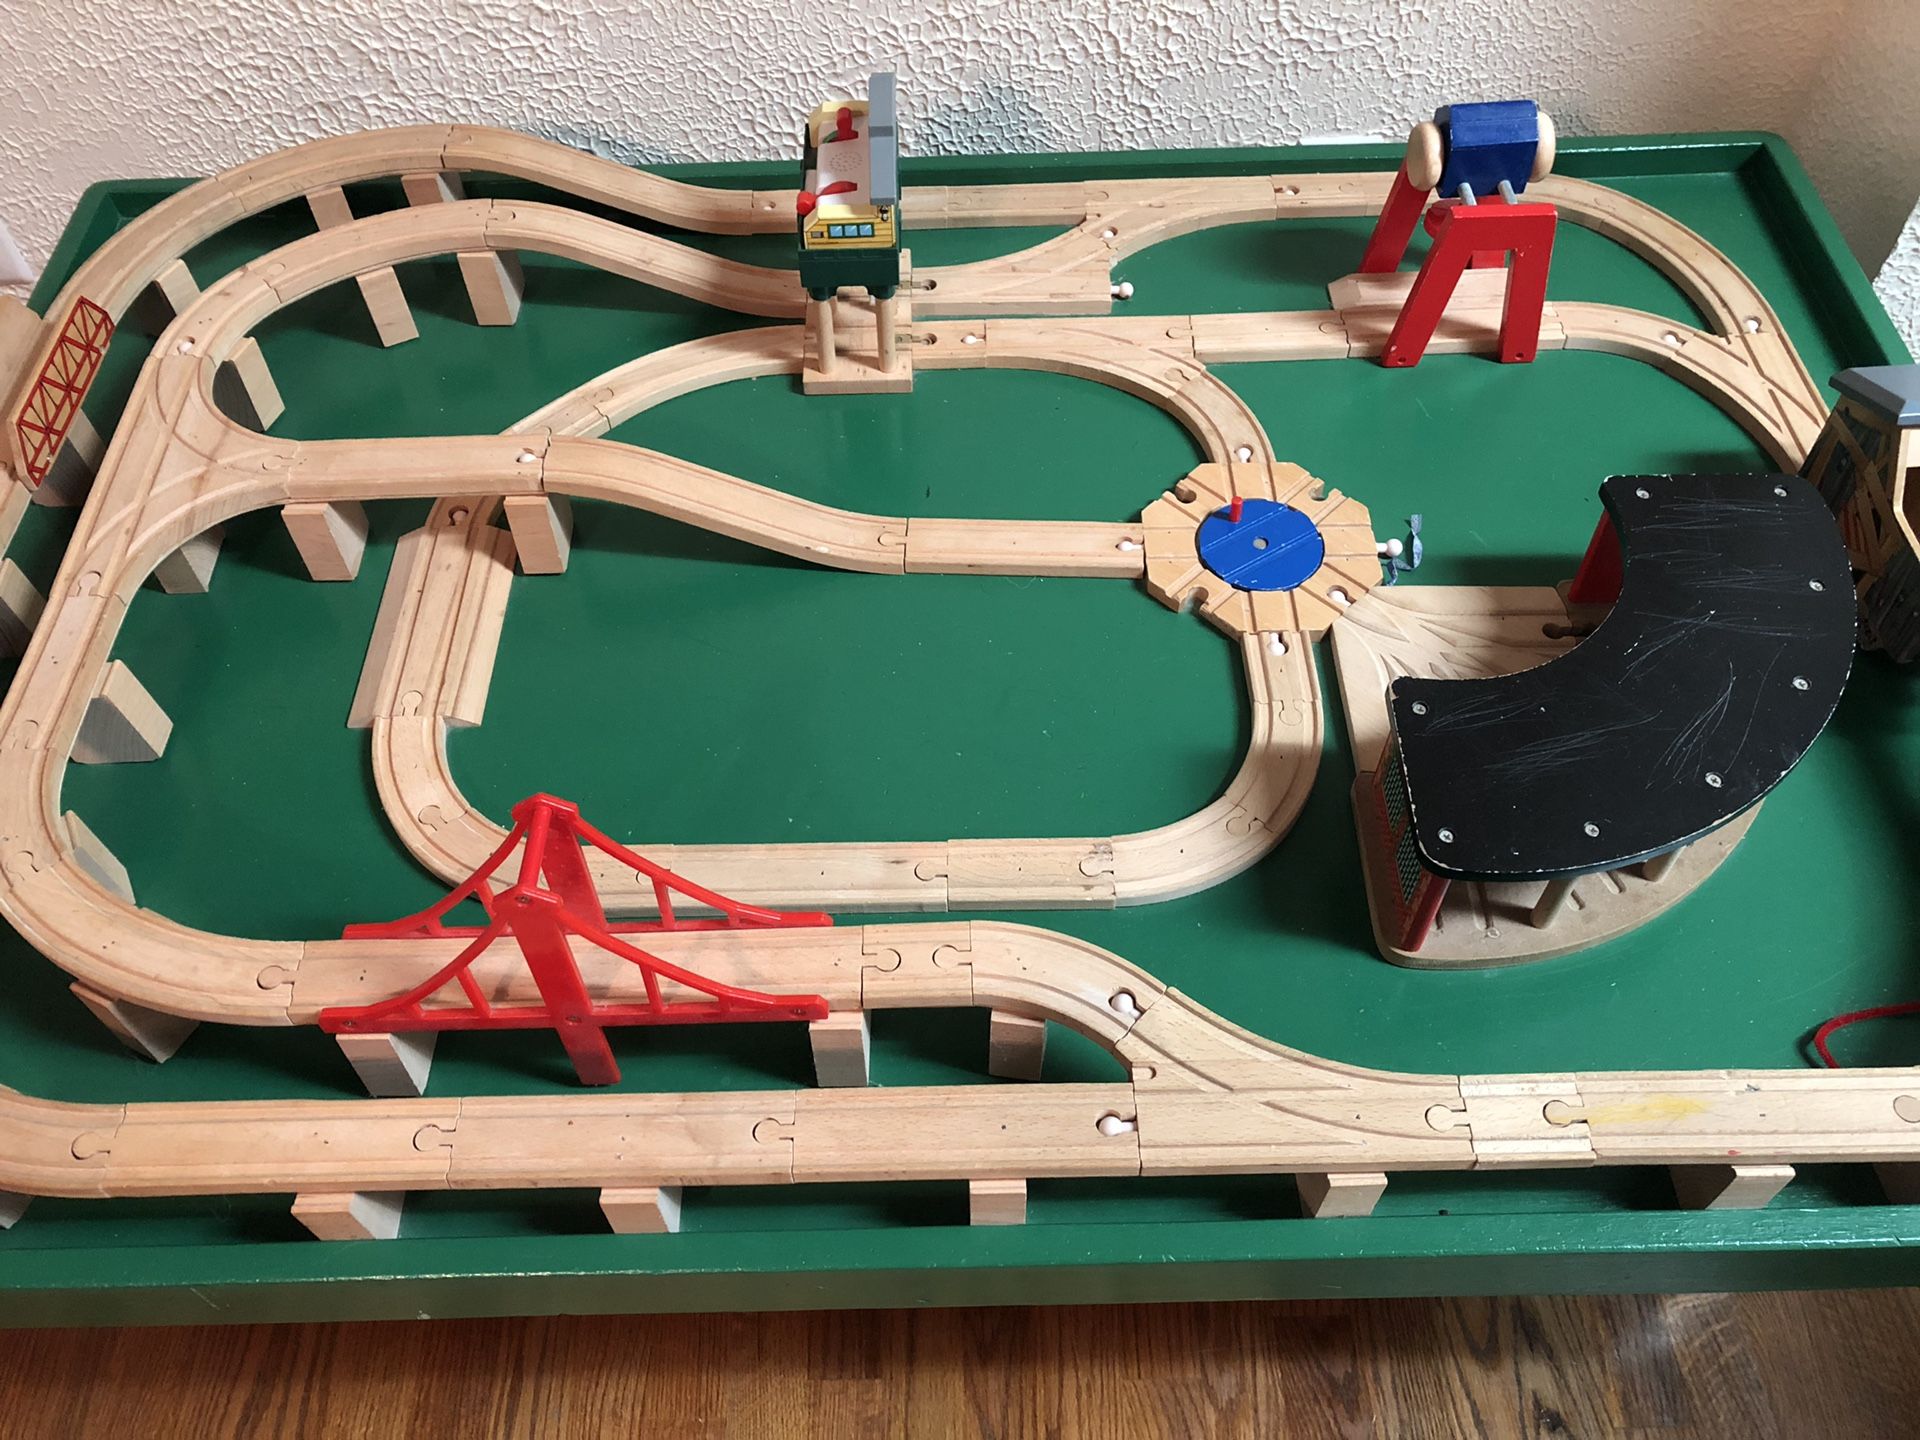 Train table with accessories